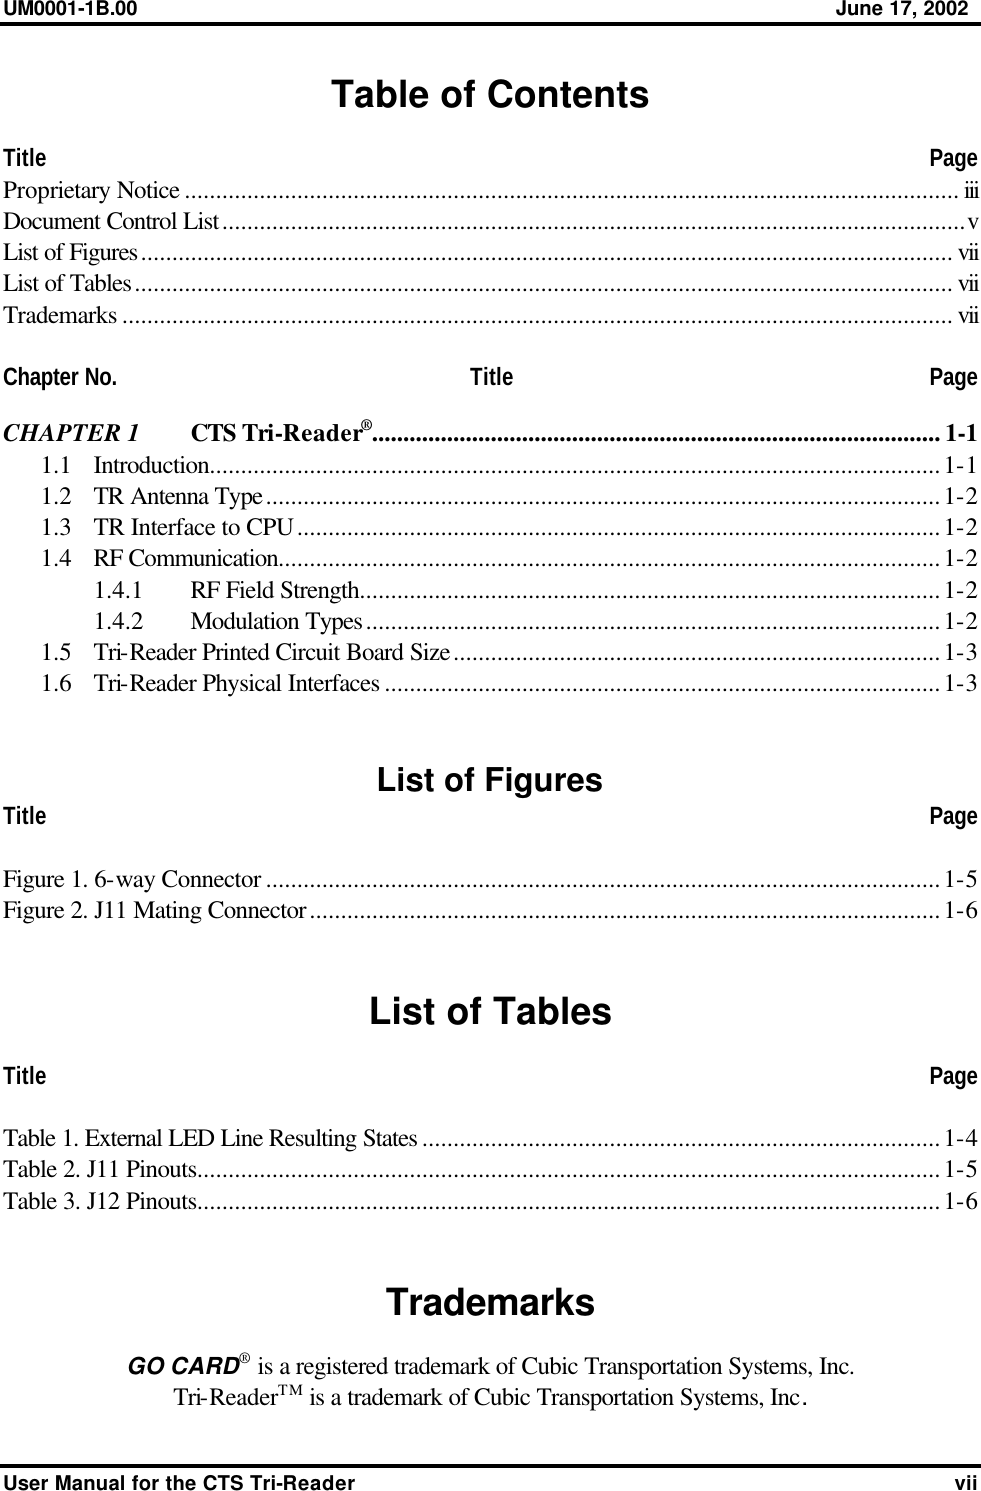 UM0001-1B.00 June 17, 2002 User Manual for the CTS Tri-Reader vii Table of Contents Title    Page Proprietary Notice ............................................................................................................................ iii Document Control List.......................................................................................................................v List of Figures.................................................................................................................................. vii List of Tables................................................................................................................................... vii Trademarks ..................................................................................................................................... vii  Chapter No. Title Page CHAPTER 1 CTS Tri-Reader®........................................................................................... 1-1 1.1  Introduction.....................................................................................................................1-1 1.2  TR Antenna Type............................................................................................................1-2 1.3  TR Interface to CPU.......................................................................................................1-2 1.4  RF Communication..........................................................................................................1-2 1.4.1  RF Field Strength.............................................................................................1-2 1.4.2  Modulation Types............................................................................................1-2 1.5  Tri-Reader Printed Circuit Board Size..............................................................................1-3 1.6  Tri-Reader Physical Interfaces .........................................................................................1-3   List of Figures Title    Page  Figure 1. 6-way Connector ............................................................................................................1-5 Figure 2. J11 Mating Connector.....................................................................................................1-6   List of Tables Title    Page  Table 1. External LED Line Resulting States ...................................................................................1-4 Table 2. J11 Pinouts.......................................................................................................................1-5 Table 3. J12 Pinouts.......................................................................................................................1-6   Trademarks GO CARD® is a registered trademark of Cubic Transportation Systems, Inc. Tri-ReaderTM is a trademark of Cubic Transportation Systems, Inc. 